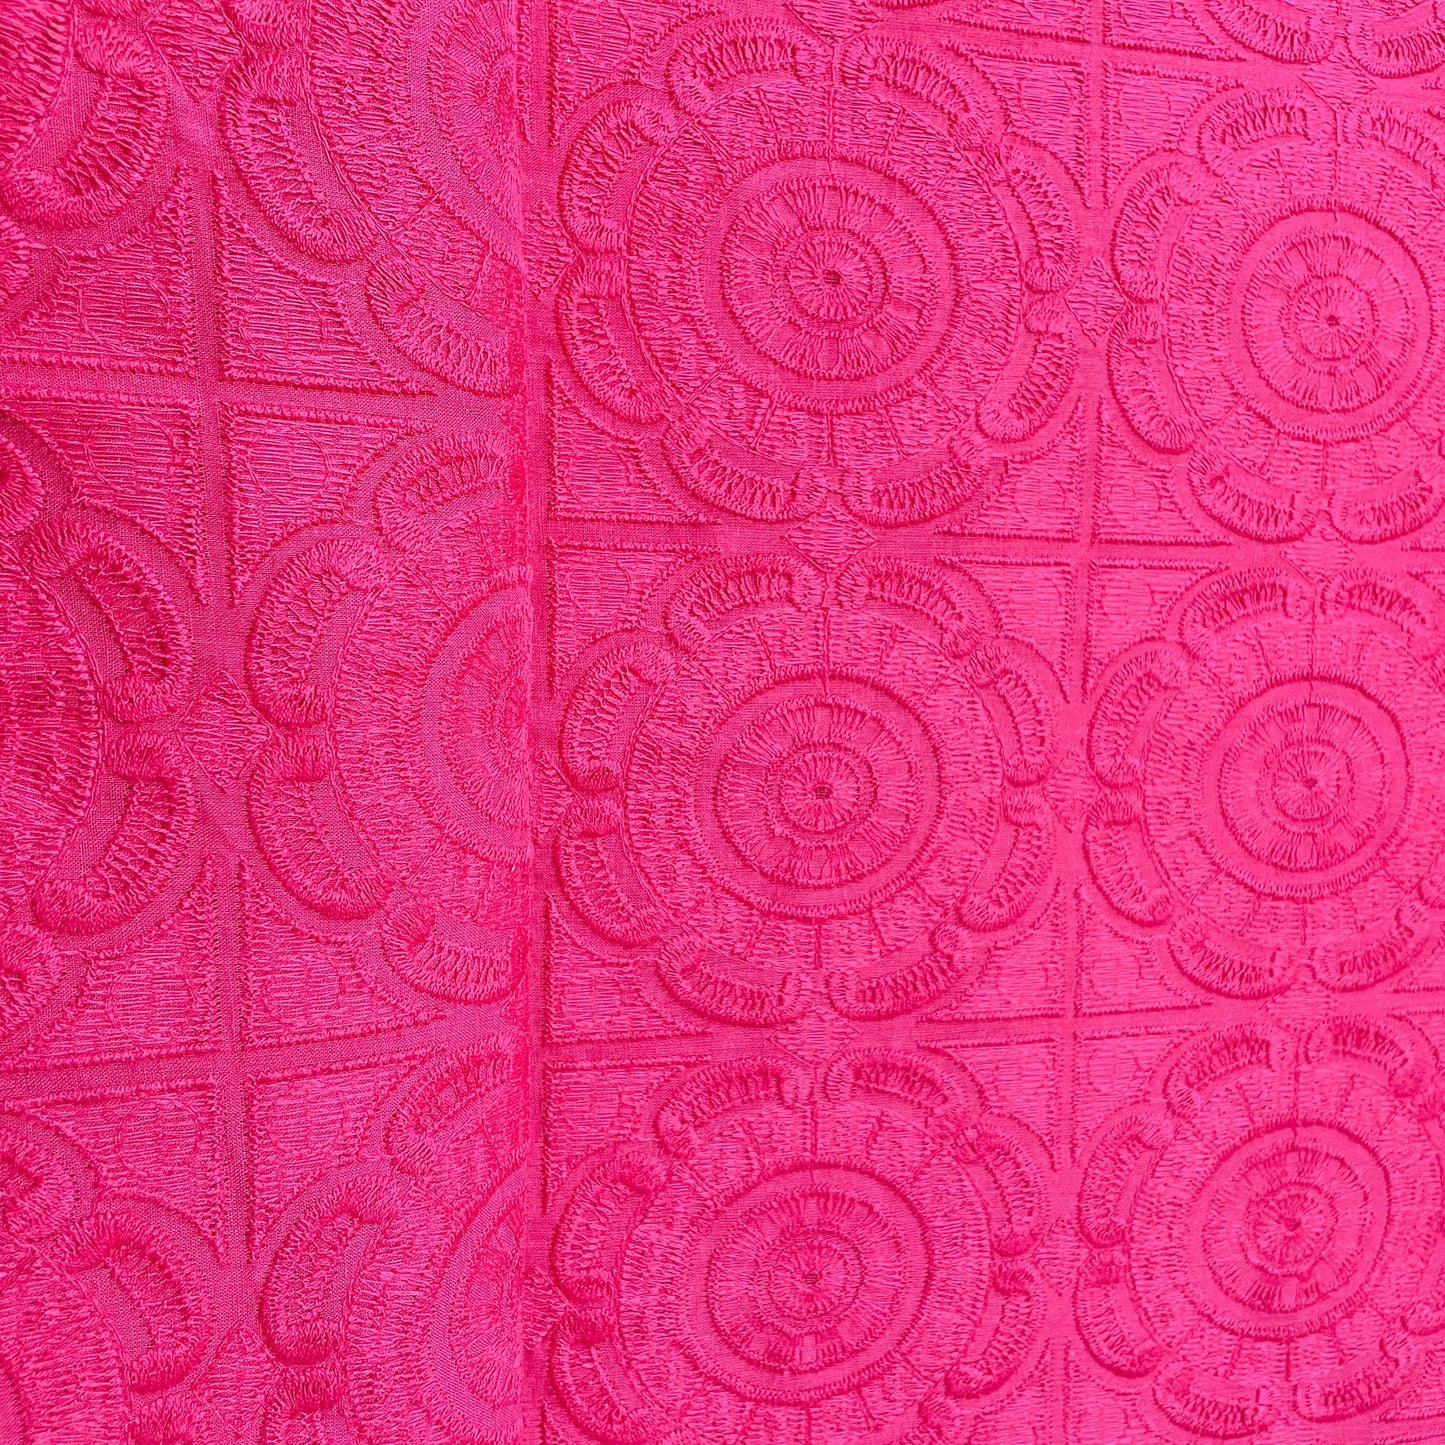 Magenta Pink Embroidery Cotton Fabric